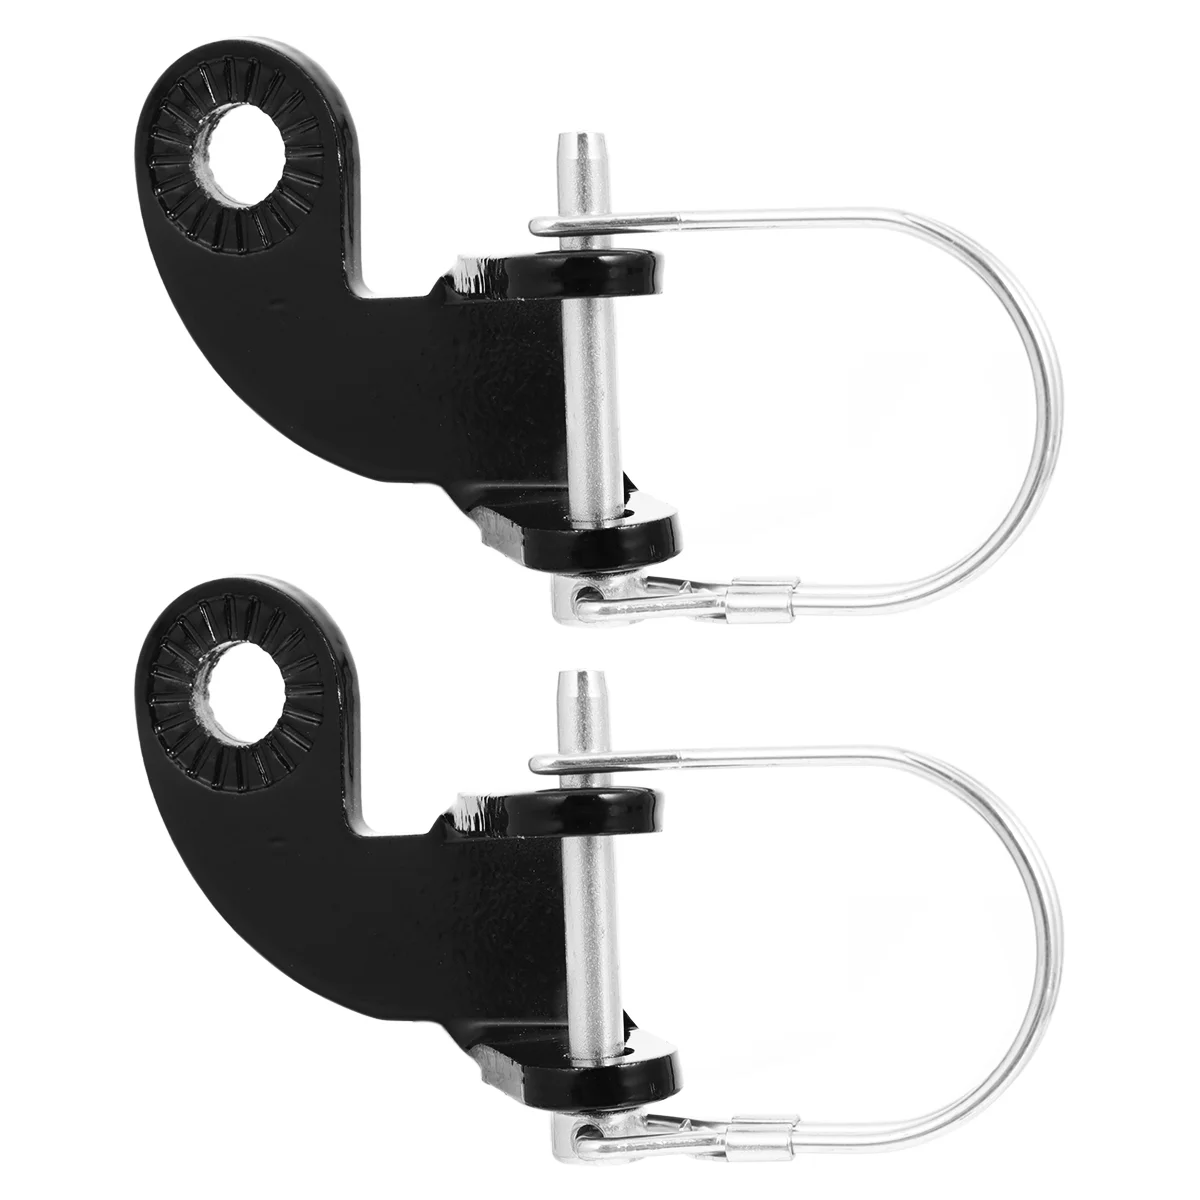 2 Pcs 135 Degree Bike Trailer Accessories Traction Adapter for Baby Pet Debris